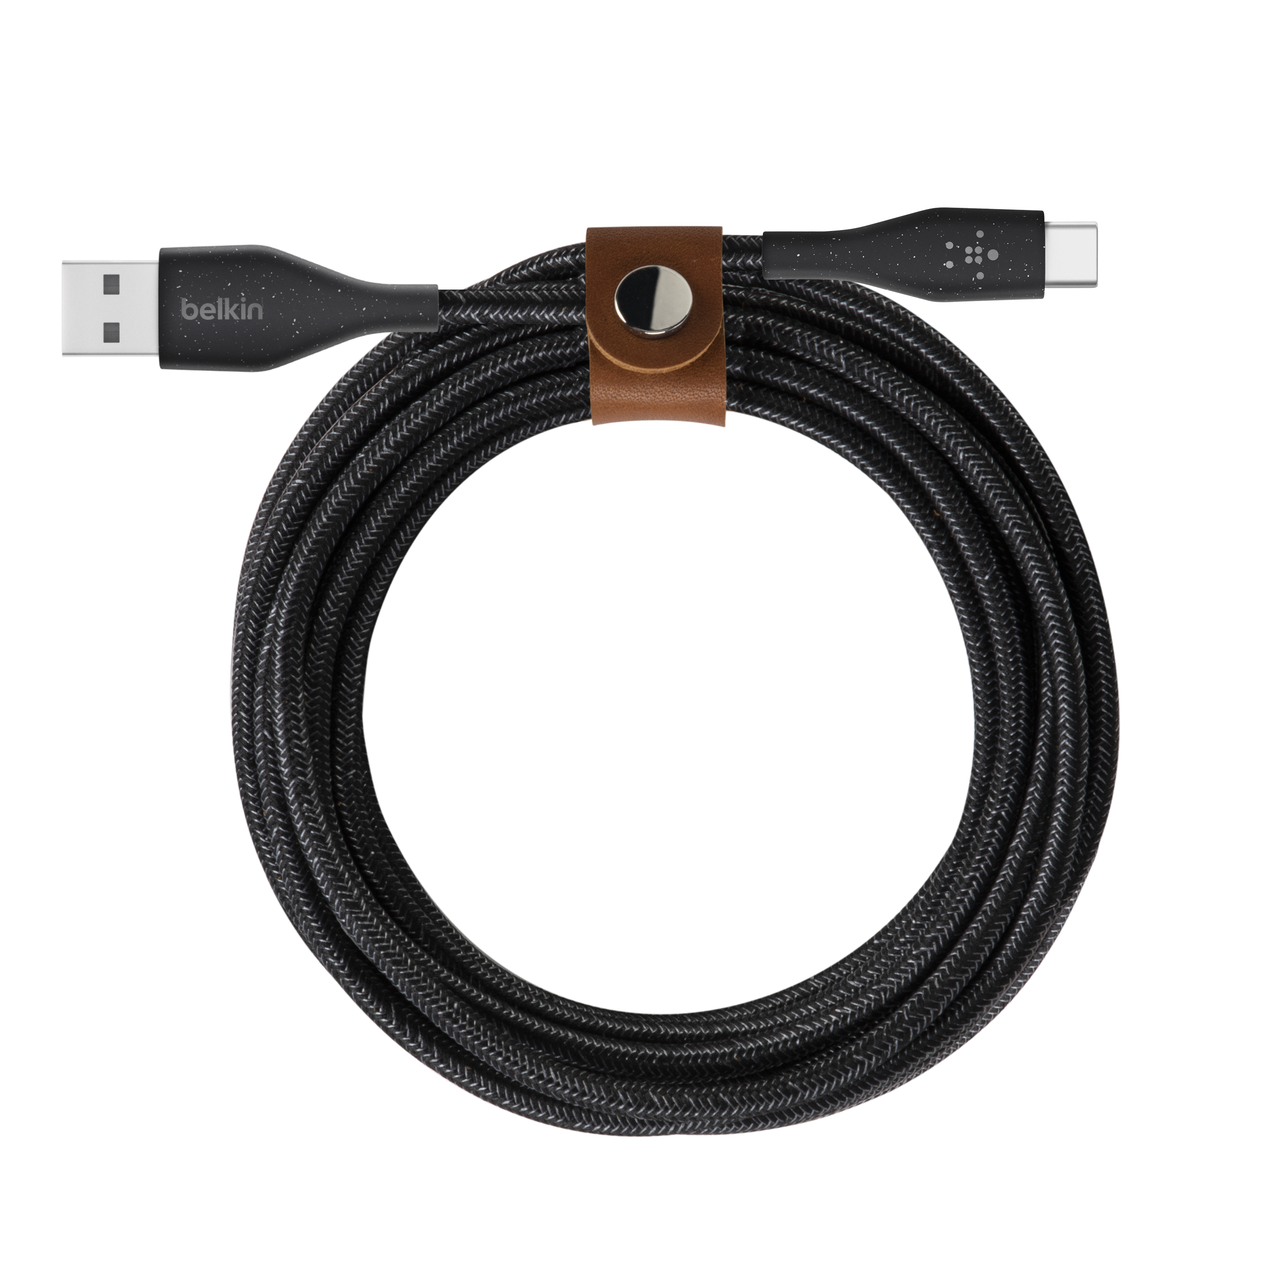 Belkin DuraTek Plus USB-C to USB-A Cable with Strap, Black